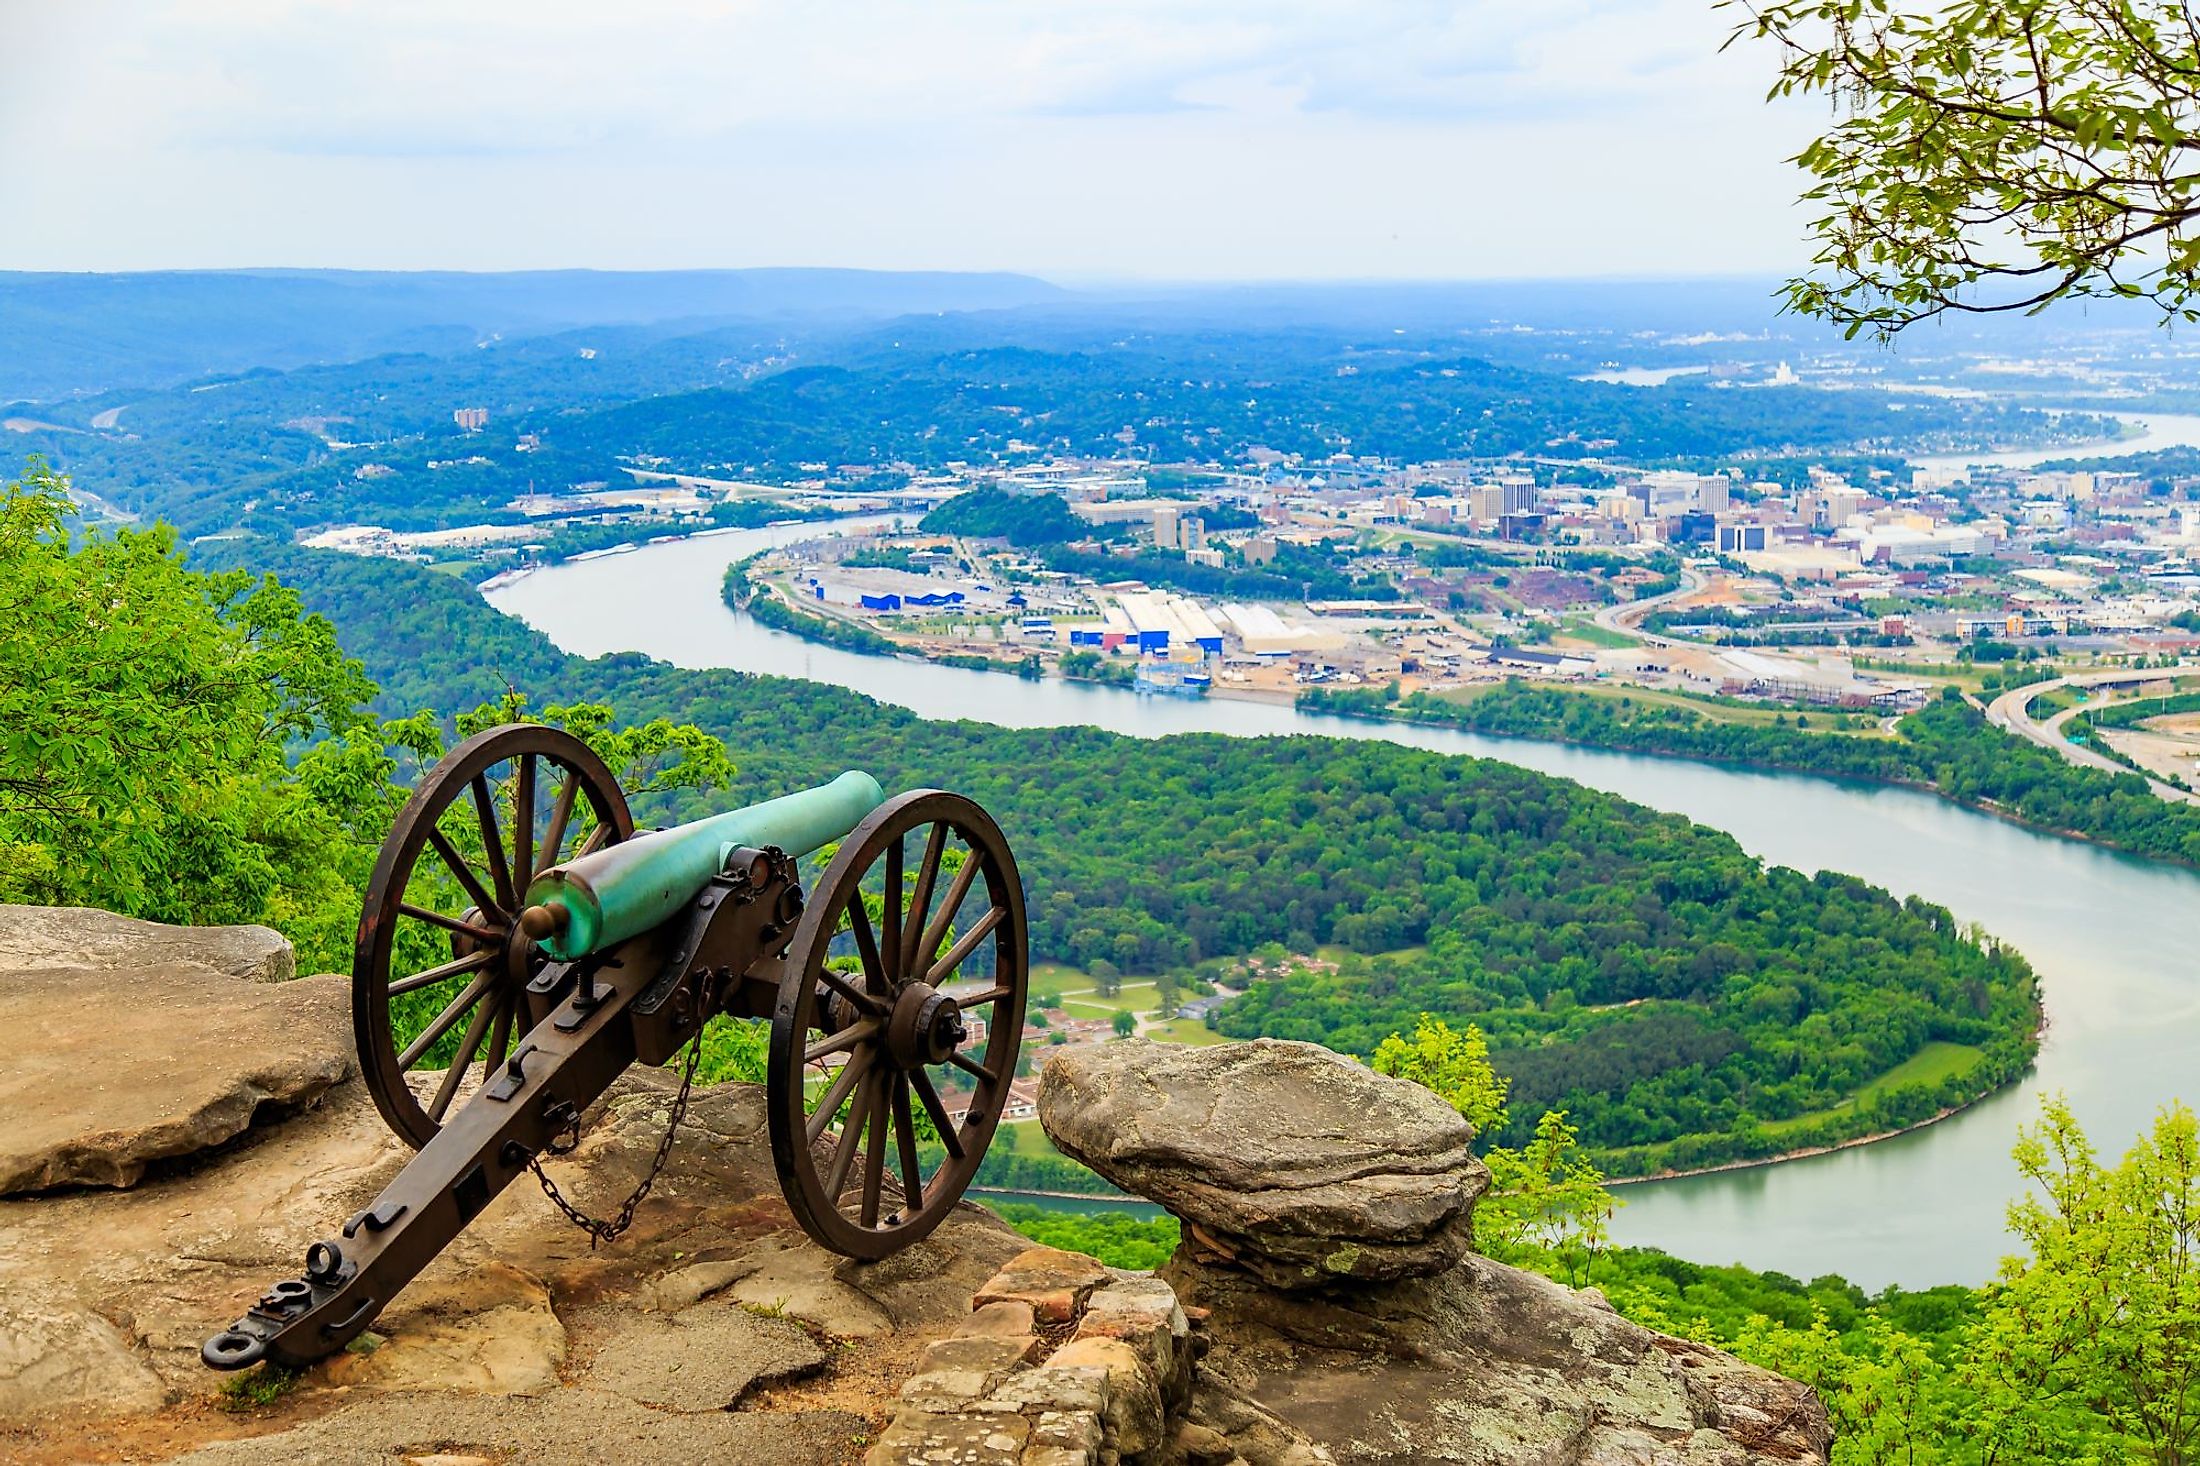 Cannon overlooking Chattanooga at Lookout Mountain Battlefield, Point Park, Civil War Cannon Monument near Chattanooga, Tennessee.